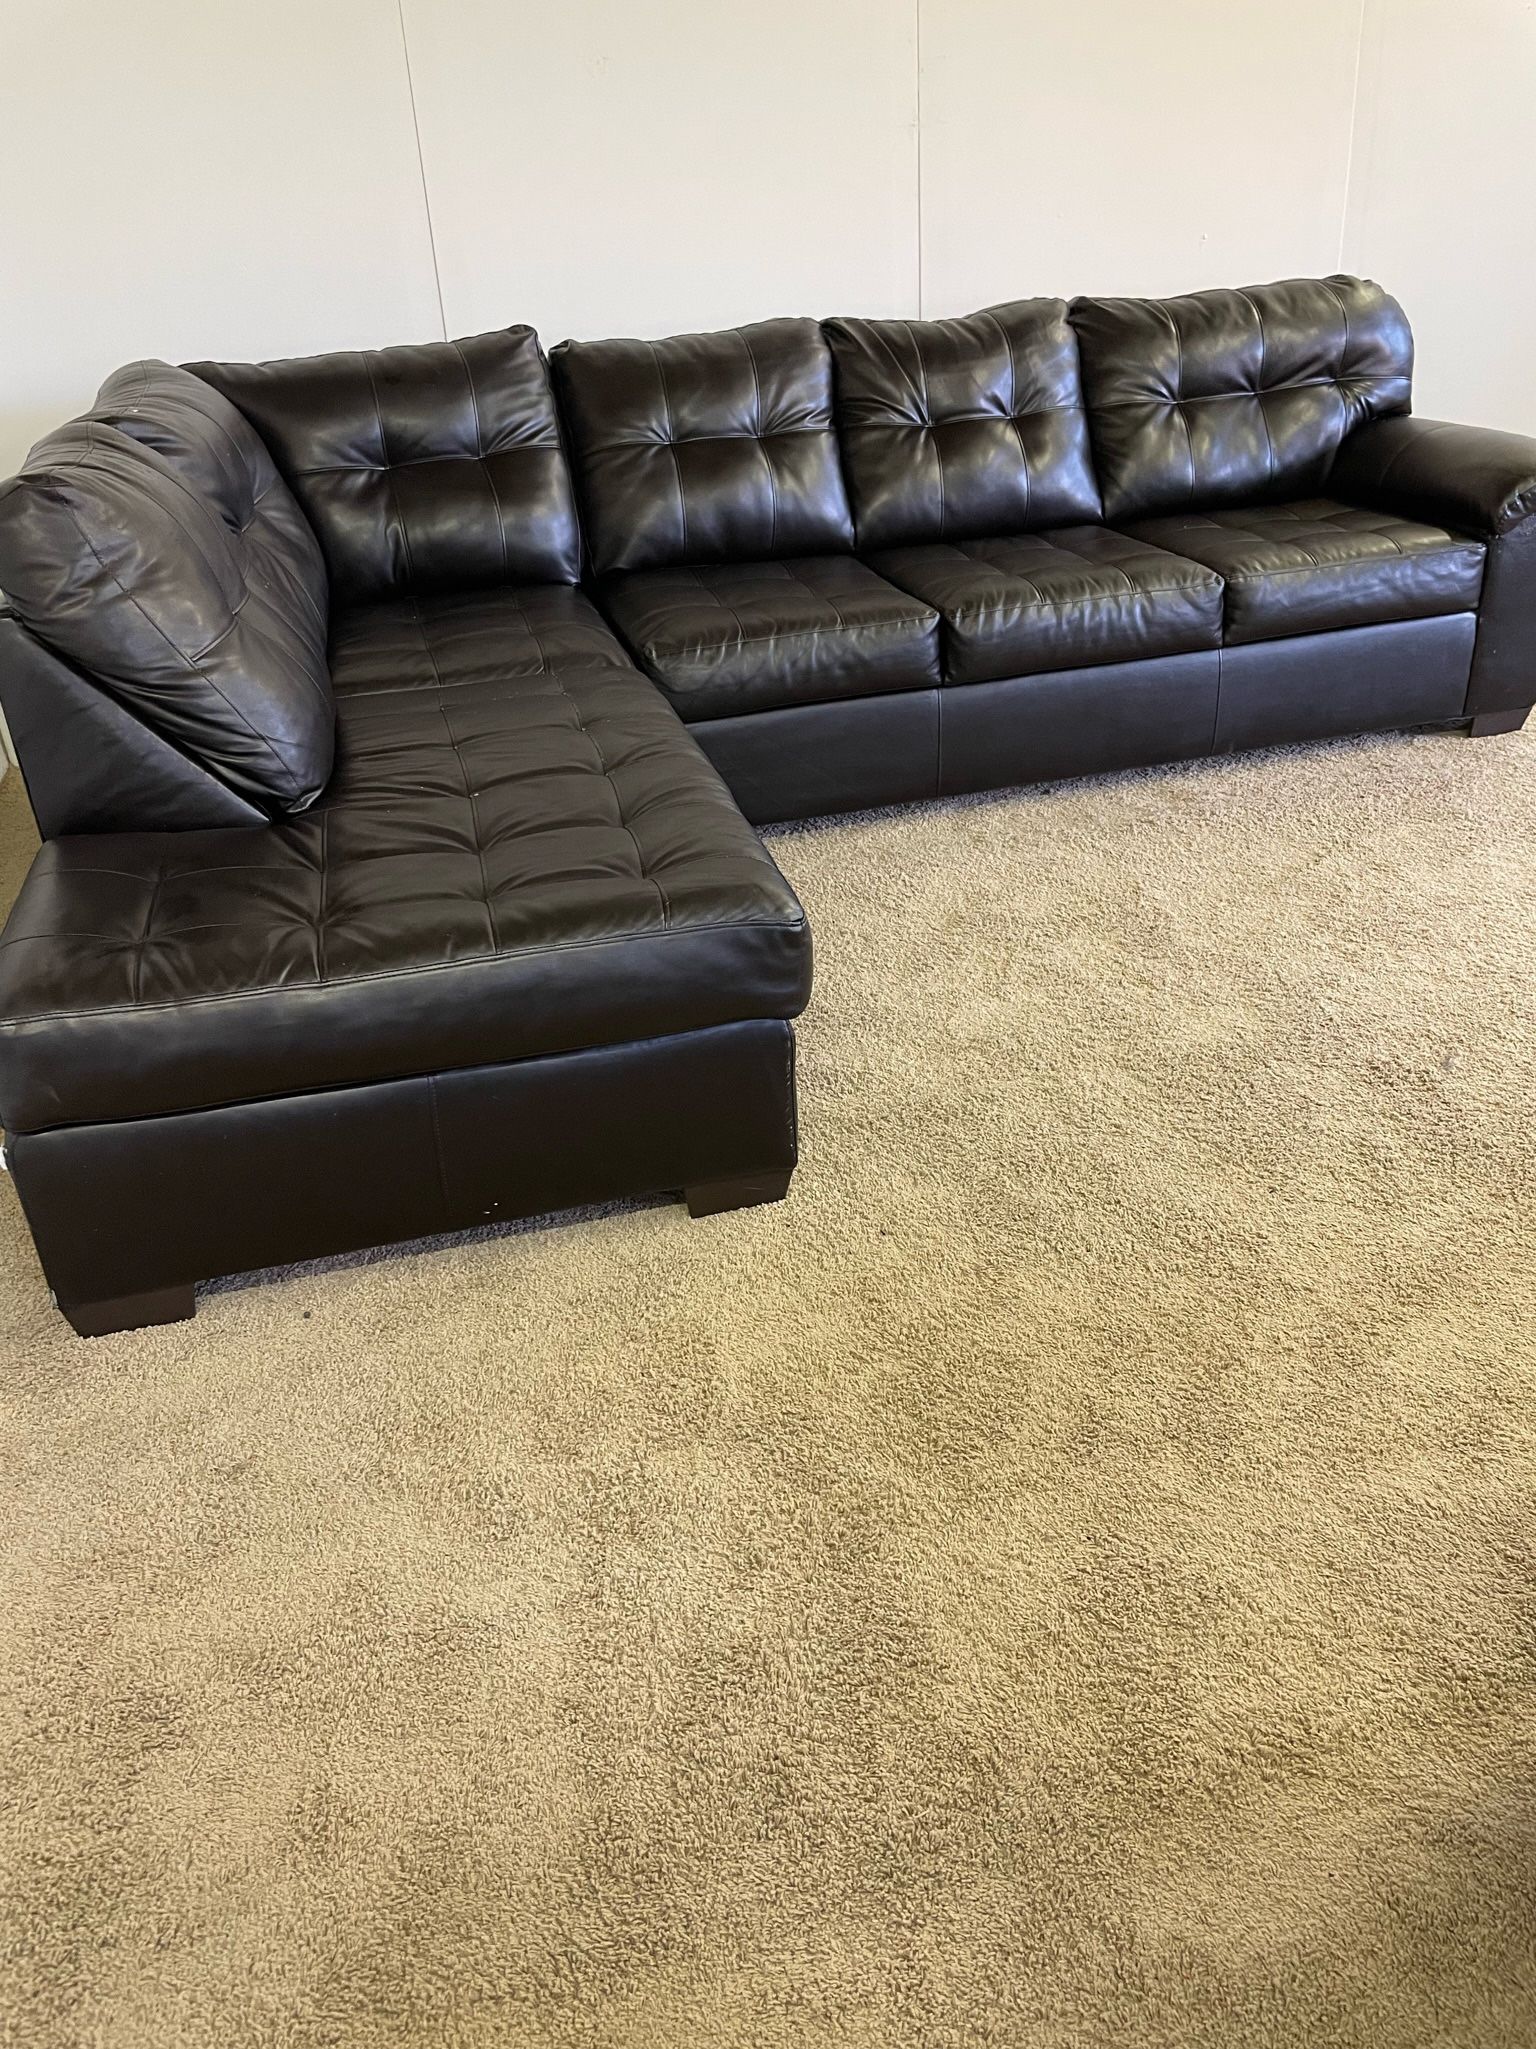 2-Piece Black L-Shape Sectional Couch Sofa *Free Delivery*